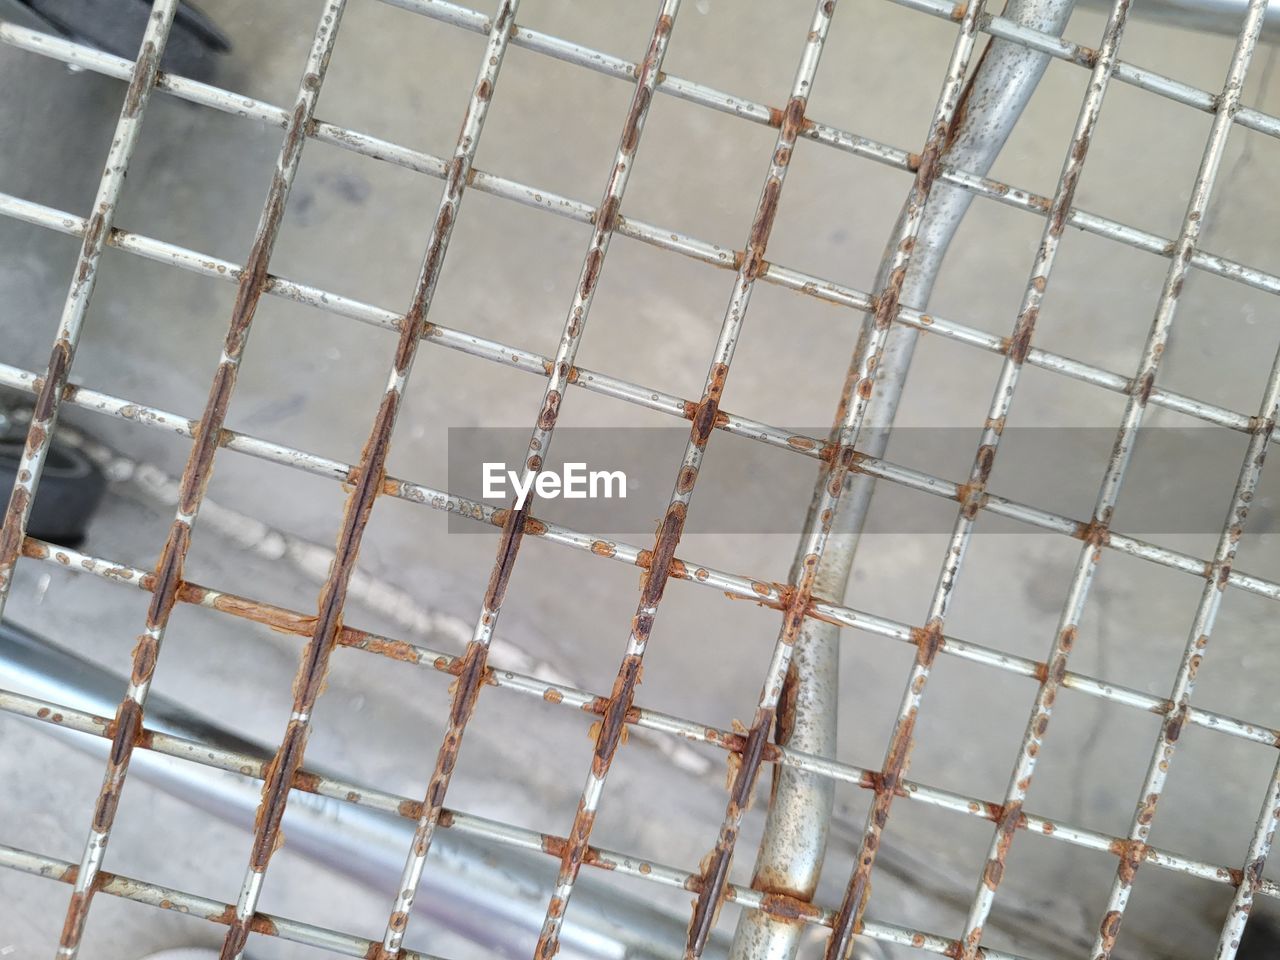 chain-link fencing, net, wall, pattern, mesh, no people, metal, full frame, fence, backgrounds, line, flooring, chainlink fence, day, floor, outdoors, iron, protection, wire, security, close-up, architecture, nature, high angle view